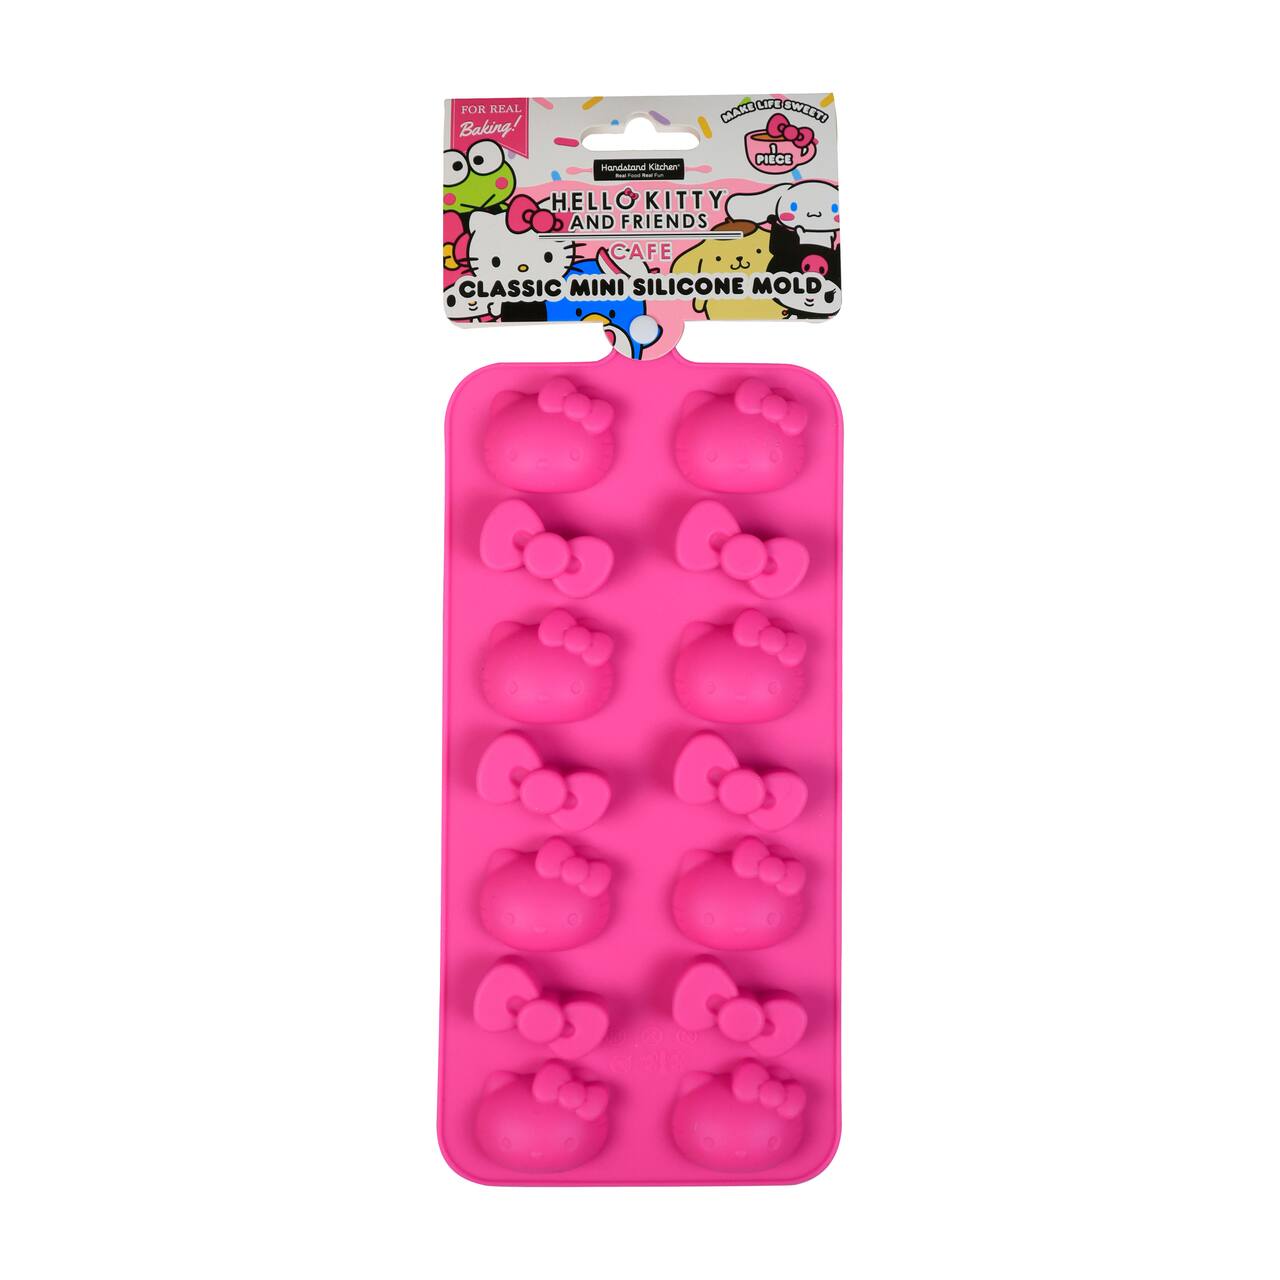 Handstand Kitchen Hello Kitty and Friends Classic Mini Silicone Mold in Pink | 4.6 x 9.5 x 2.4 | Michaels